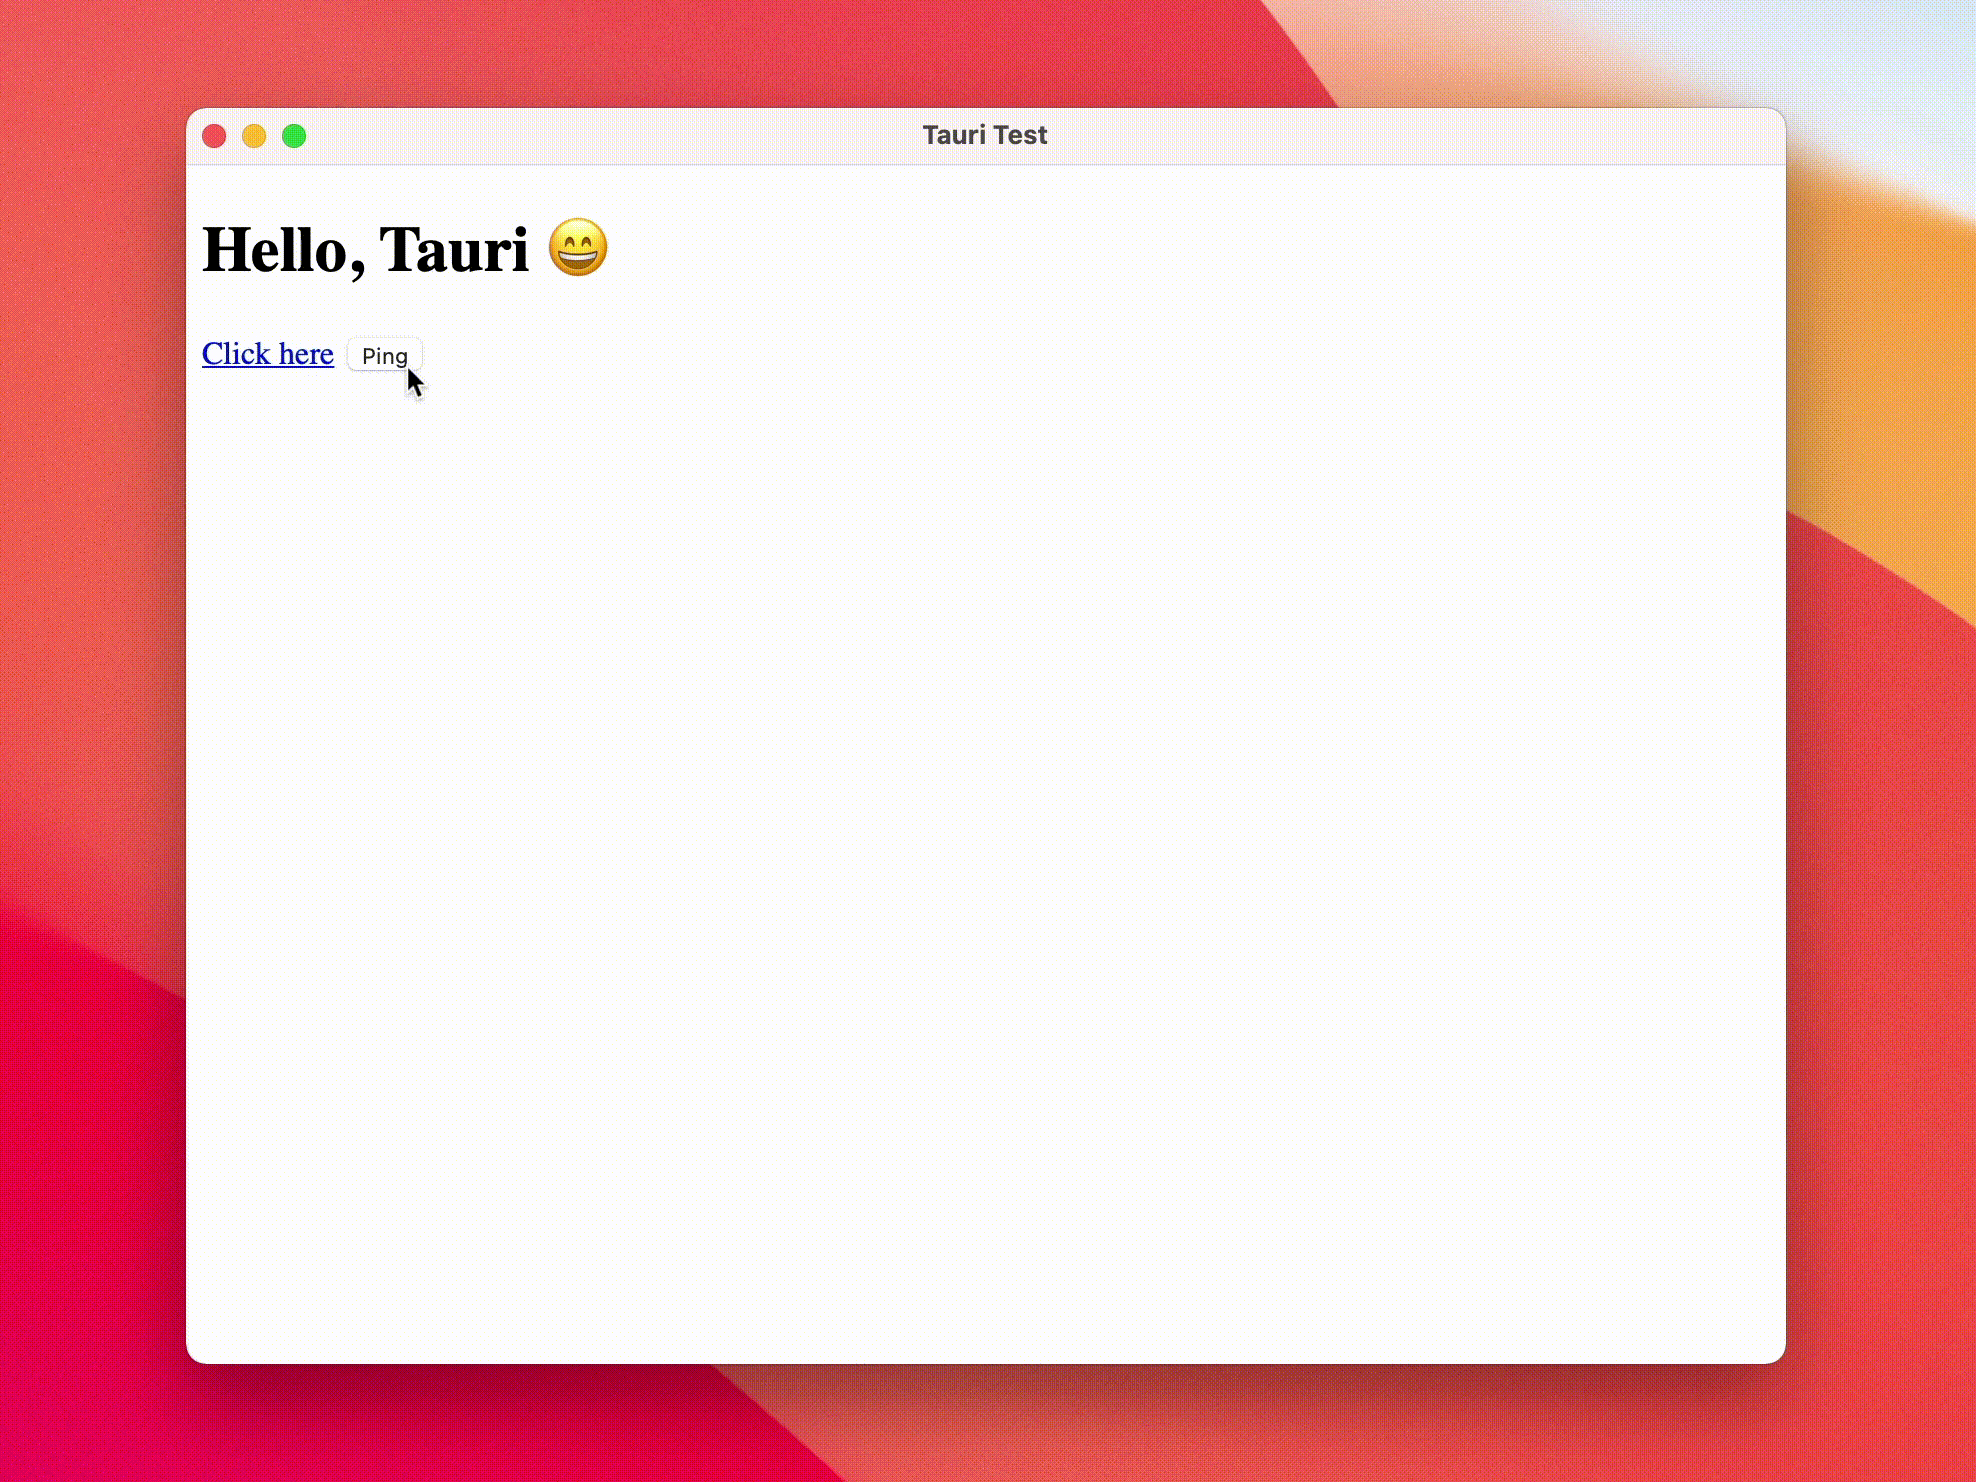 Tauri and Ember.js communicating with each other